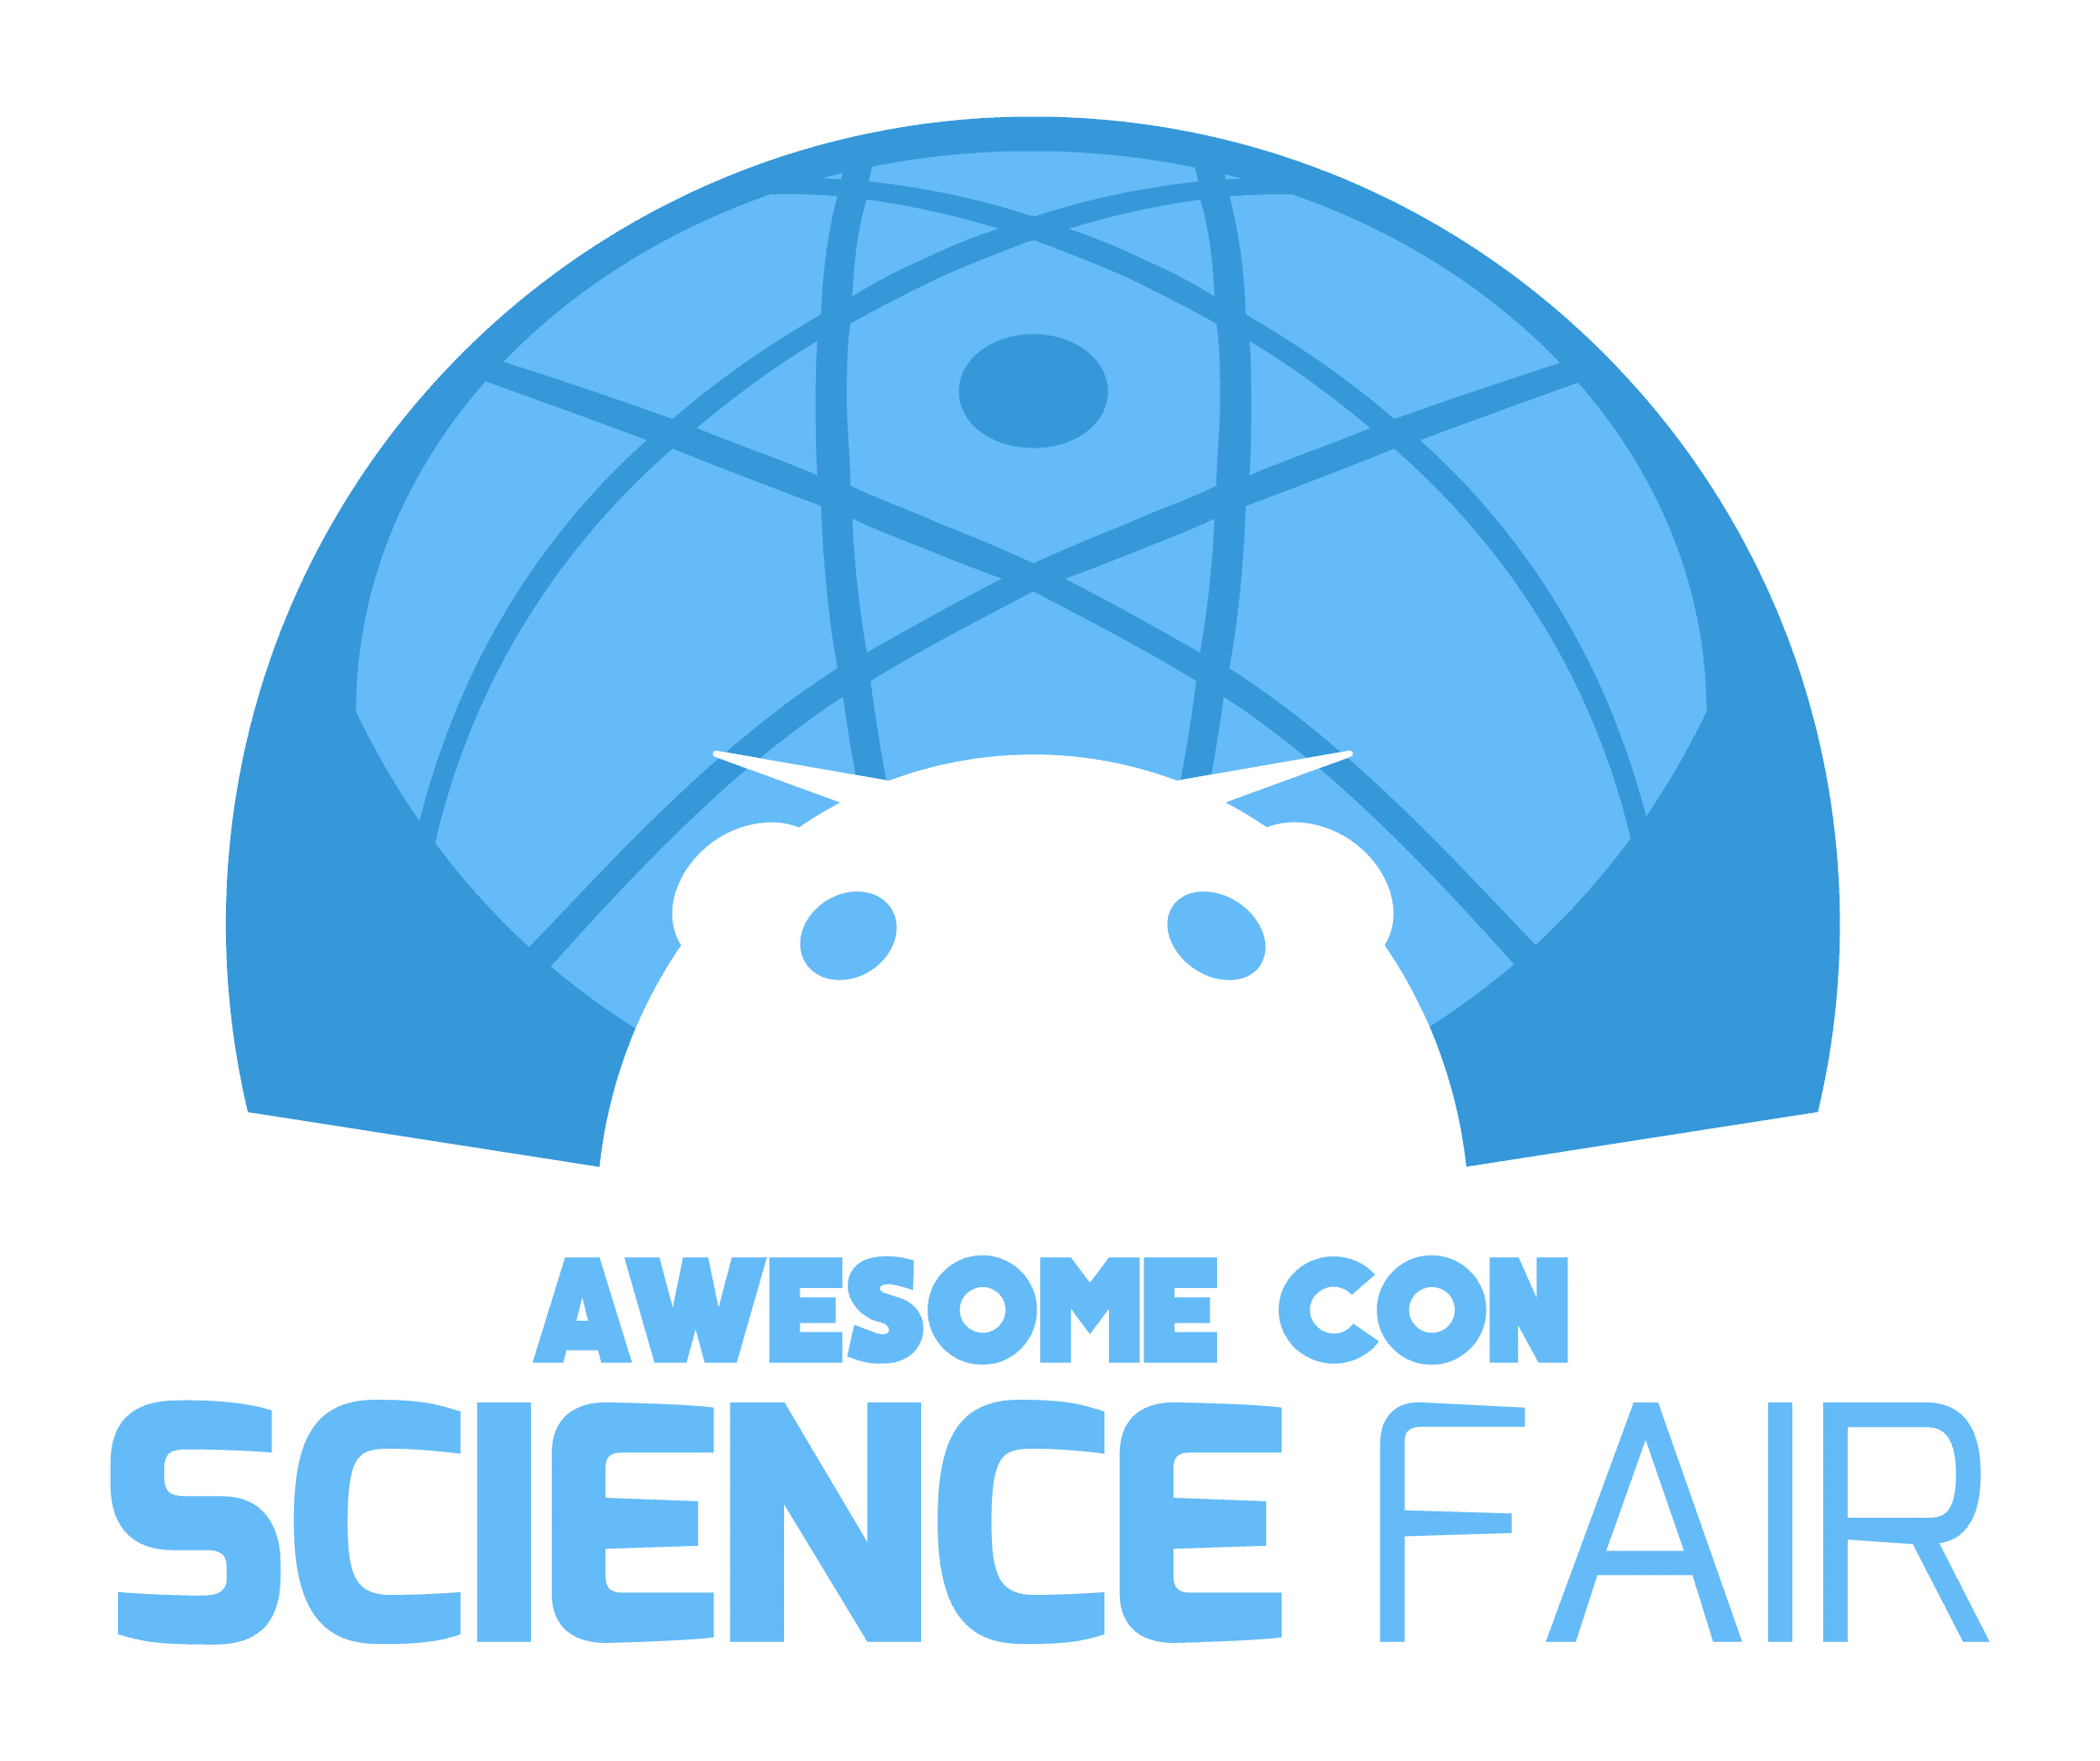 Geek insider, geekinsider, geekinsider. Com,, awesome con's science fair brings another year of innovation, exploration and fun, comics